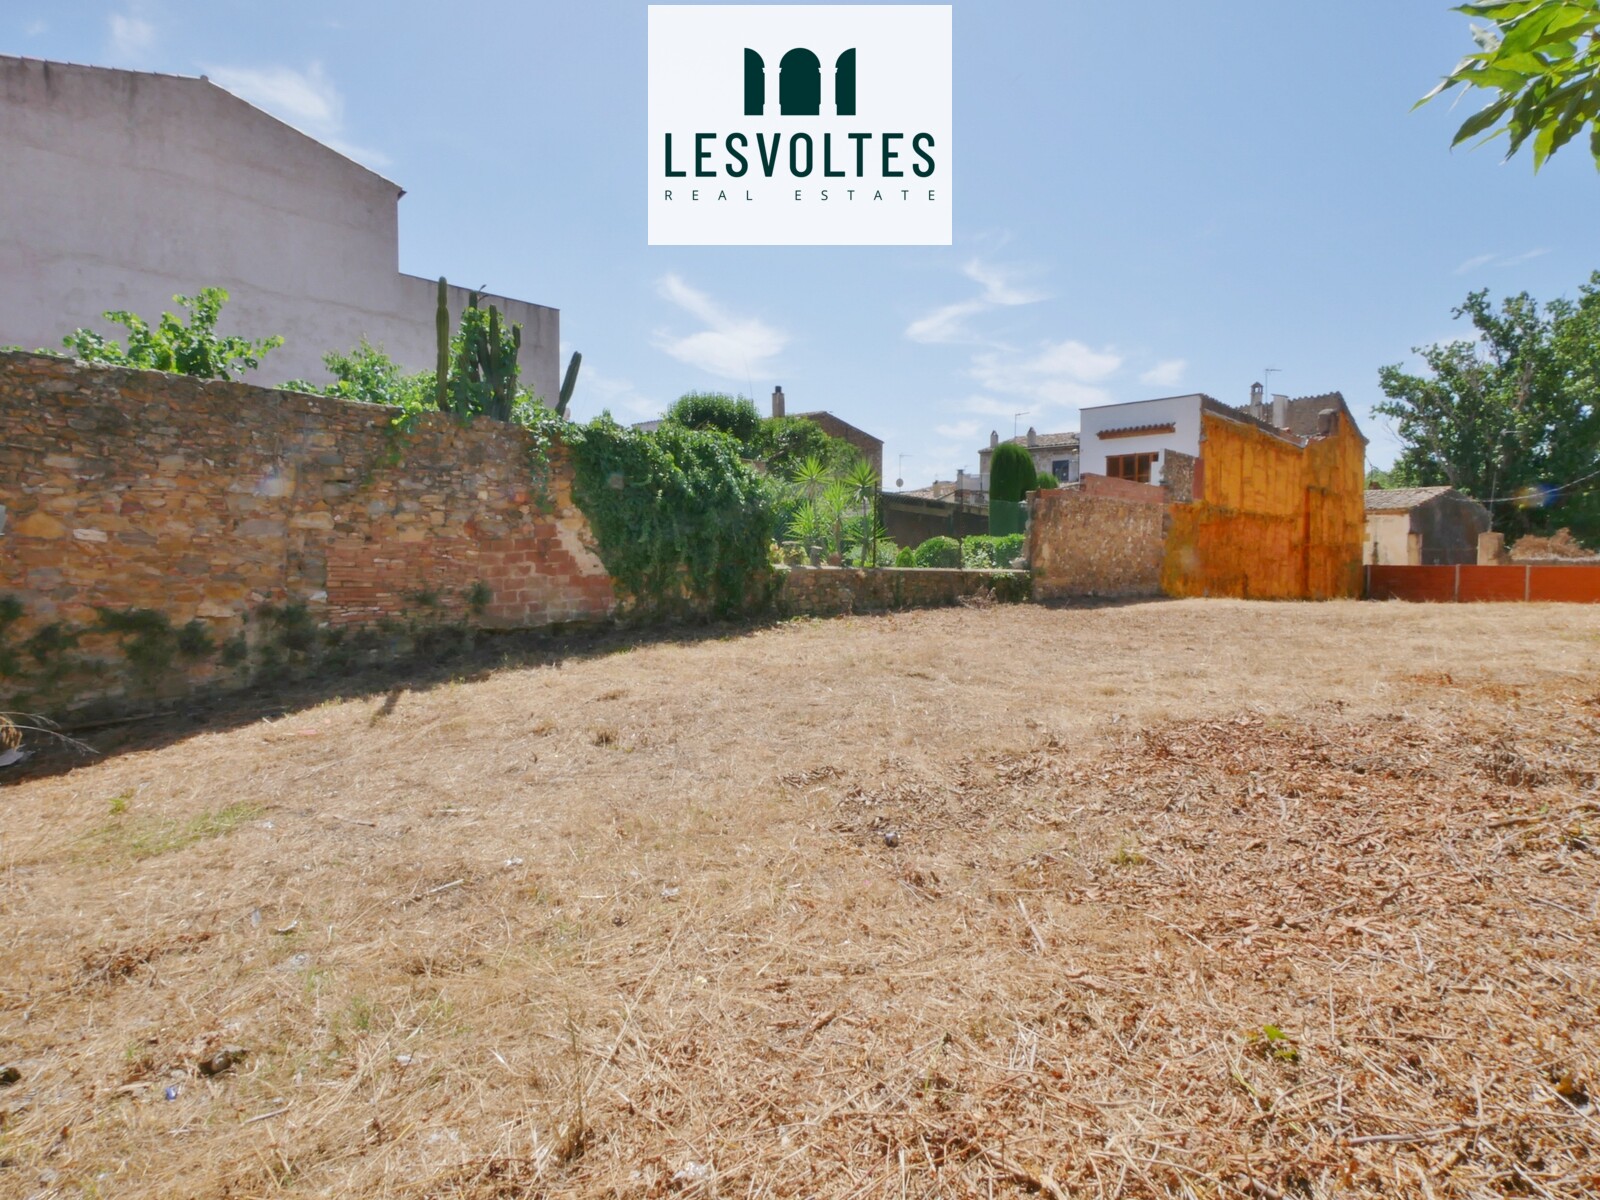 EXCEPTIONAL OPPORTUNITY! 605 M2 LAND FOR SALE IN THE CENTER OF LA BISBAL D'EMPORDÀ WITH ENTRANCE BY 2 STREETS.